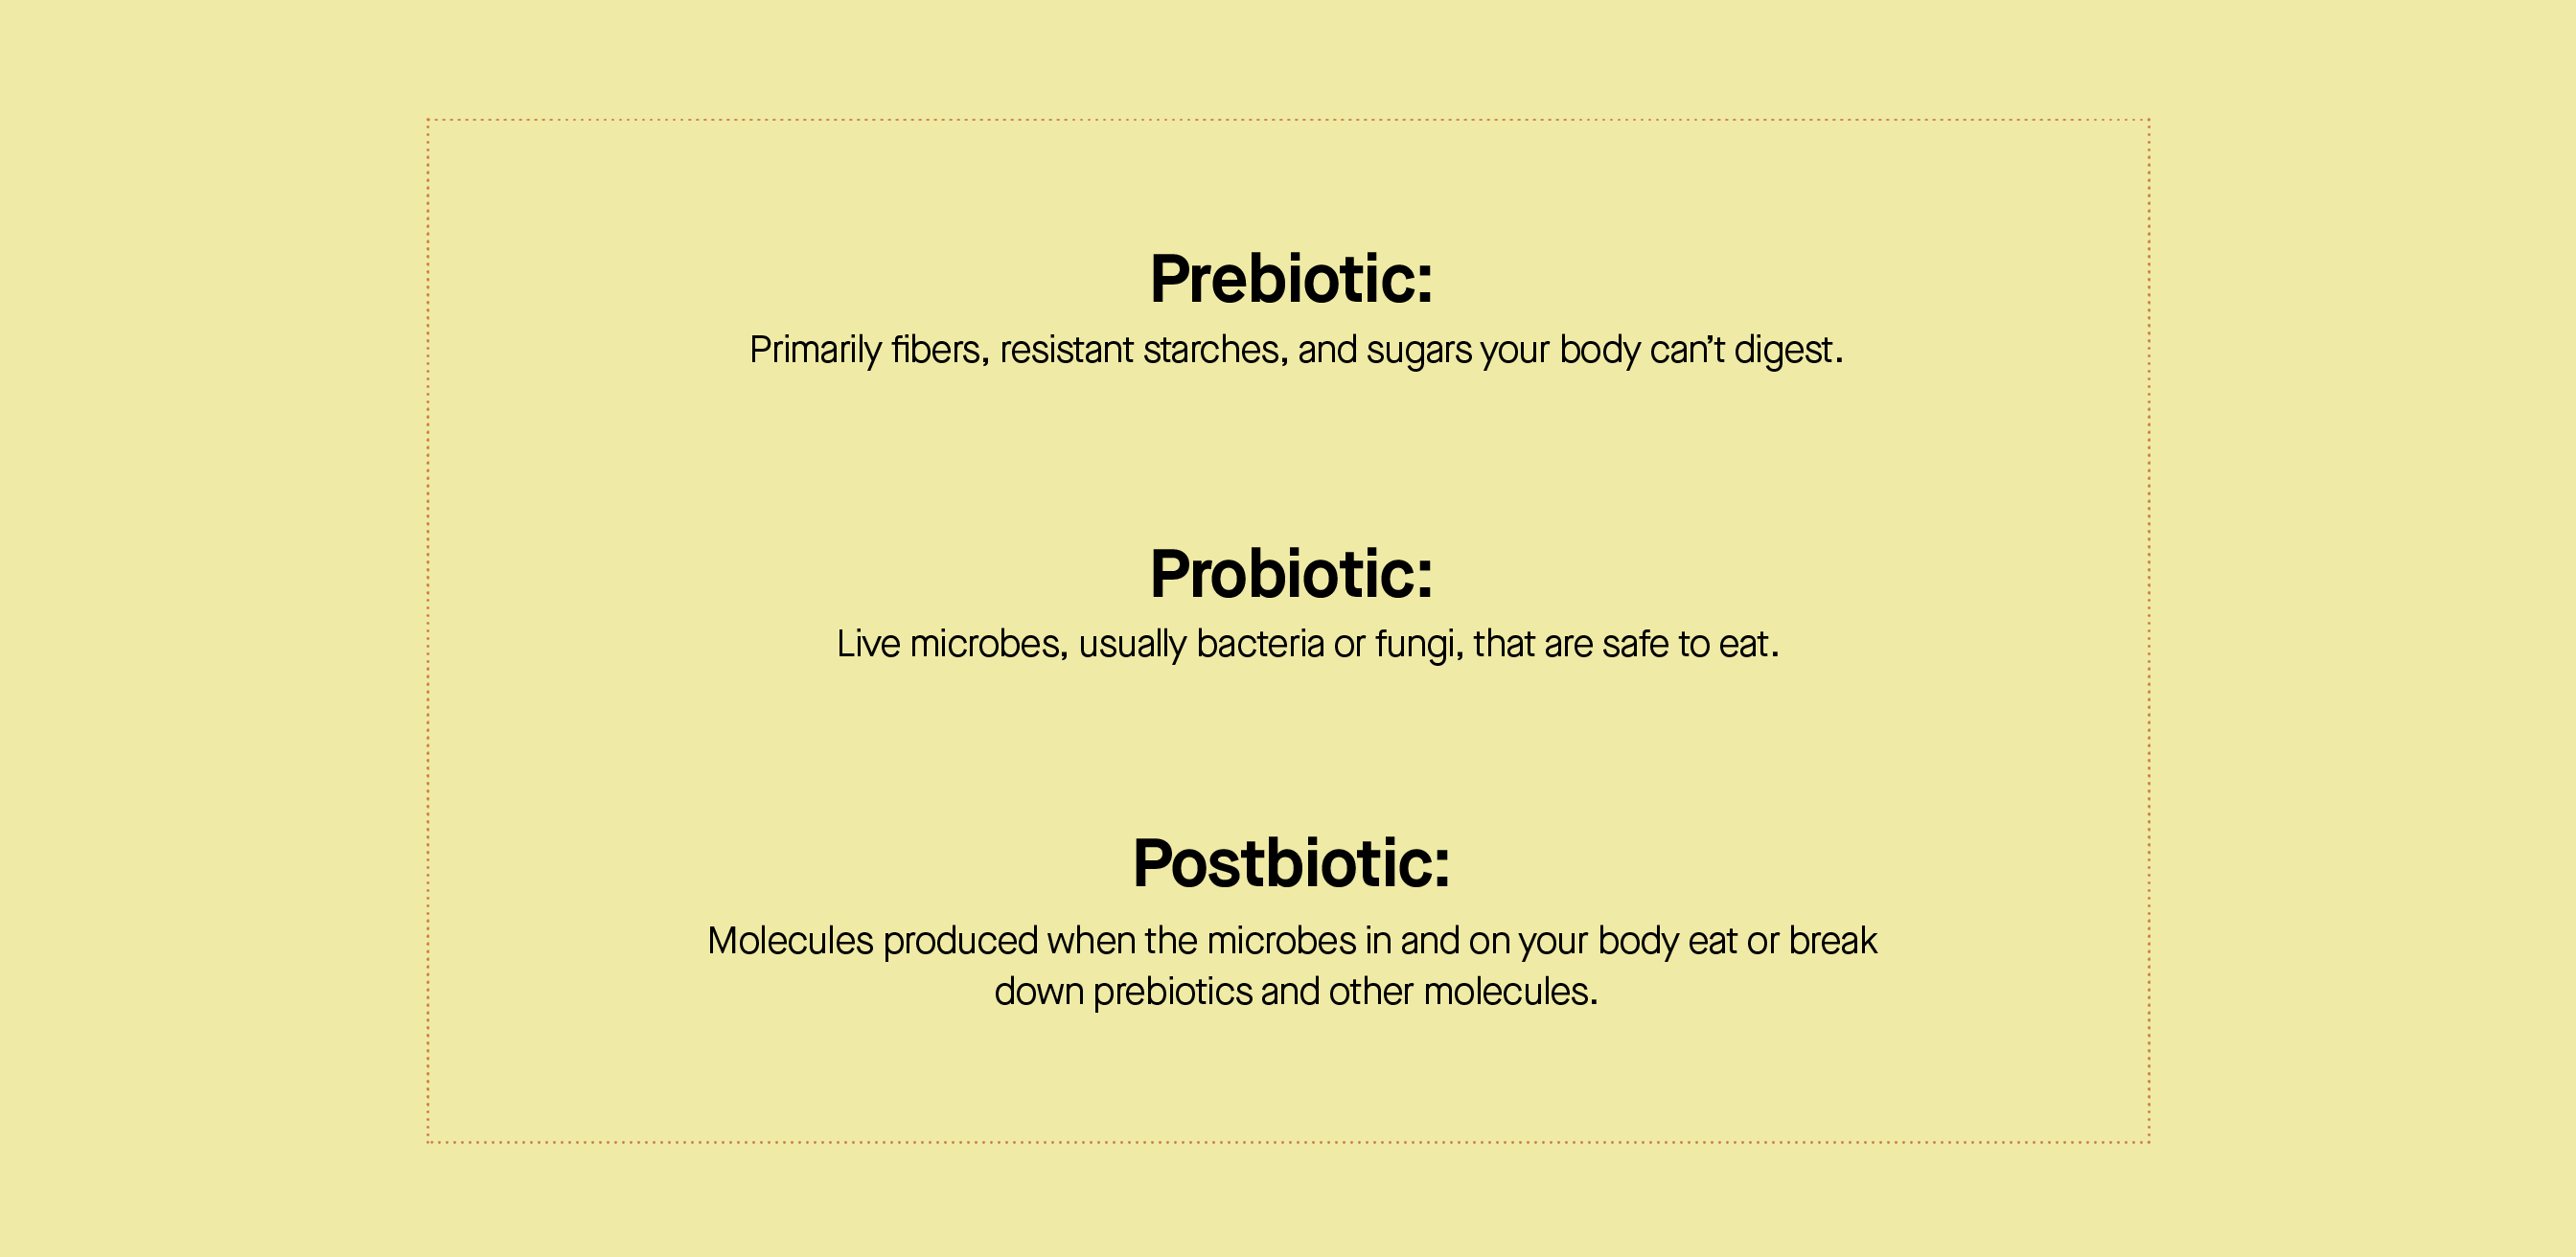 The definitions of pre-, pro-, and post- biotics